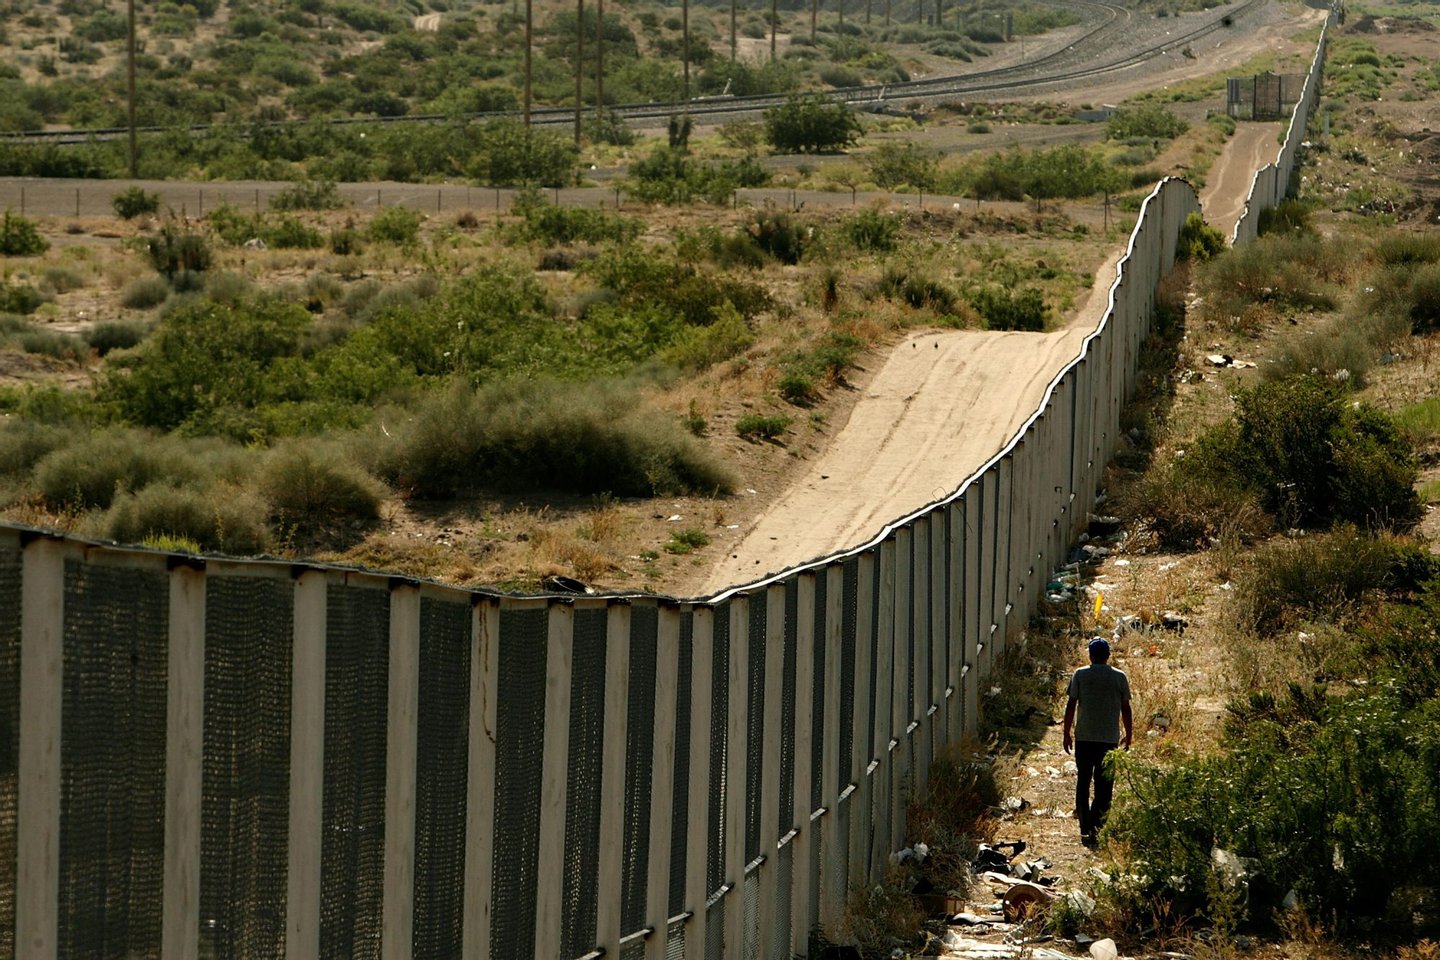 CIUDAD JUAREZ, CHIHUAHUA - JUNE 29: A man walks along the border fence between the U.S. and Mexico on June 29, 2007 in the Anapra area of Ciudad Juarez, Mexico. This area is a popular crossing spot for immigrants to ilegally cross into the United States because houses are close to the border on the south side and the highway is close to the north side. (Photo by Chip Somodevilla/Getty Images)